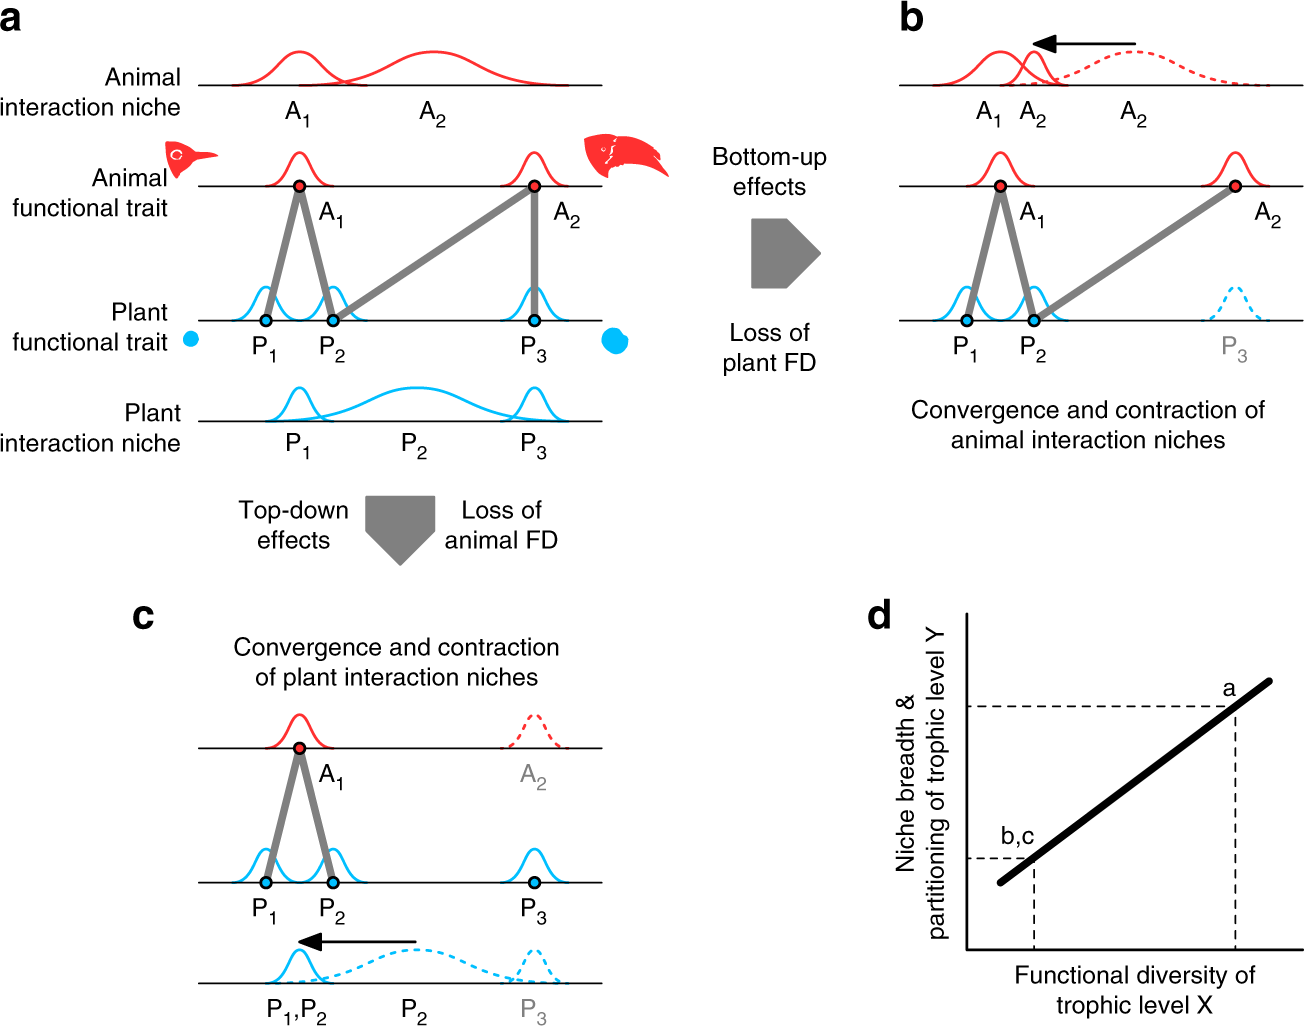 Plant and animal functional diversity drive mutualistic network assembly  across an elevational gradient | Nature Communications